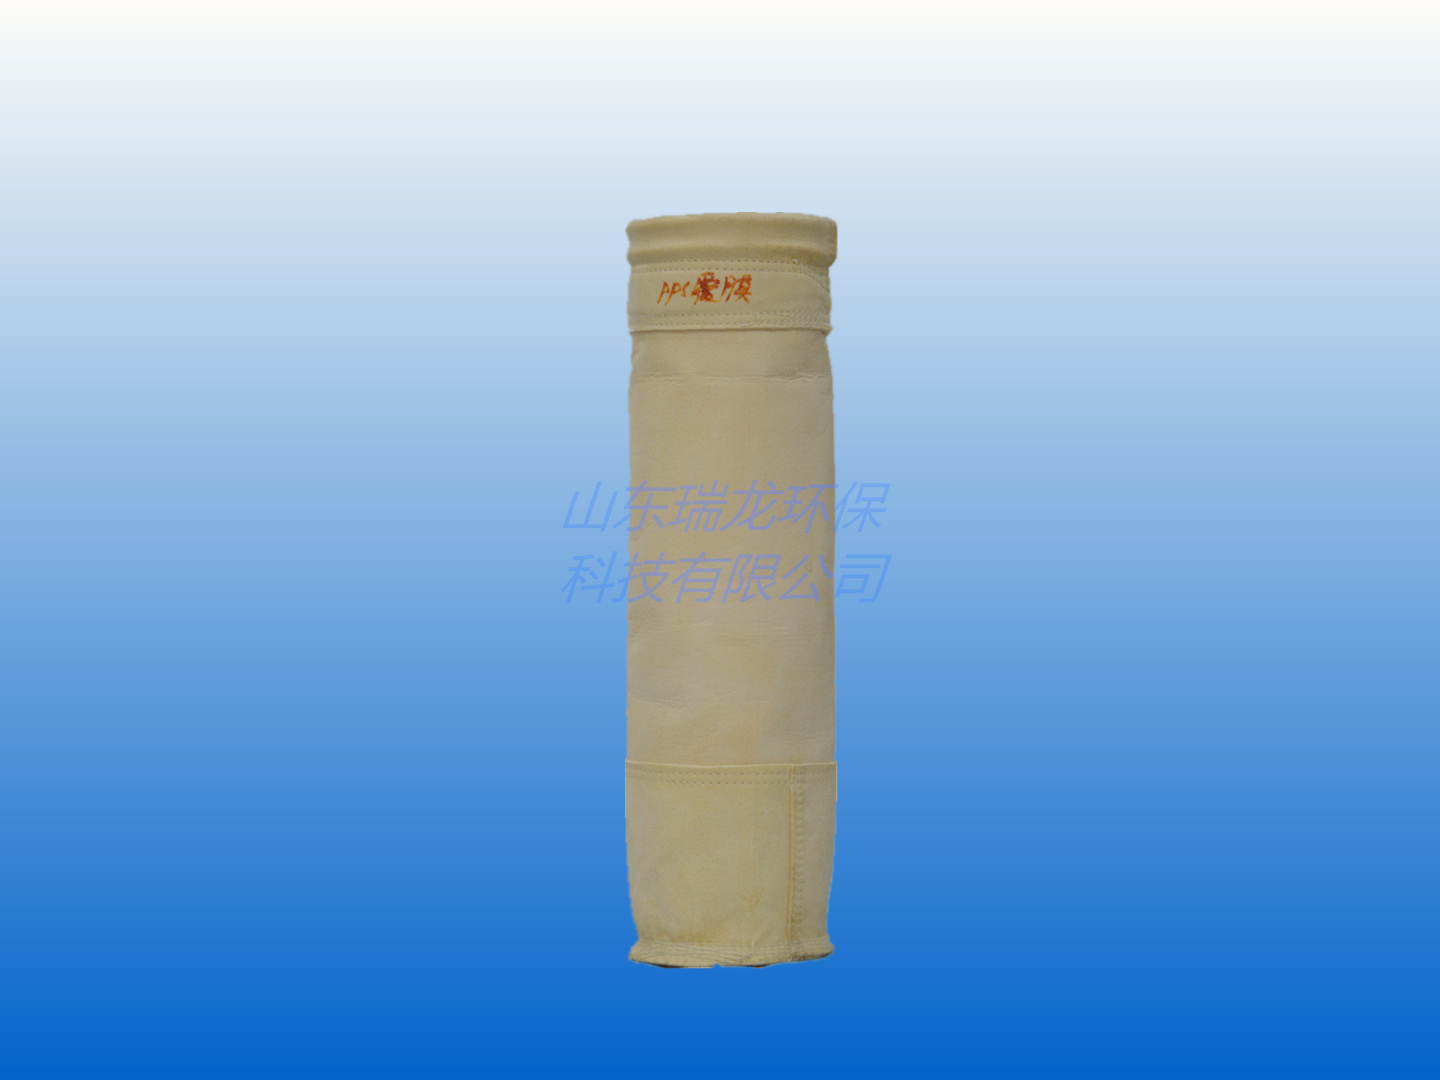 PPS耐酸碱针刺毡 PPS acid and alkali resistant needled felt    